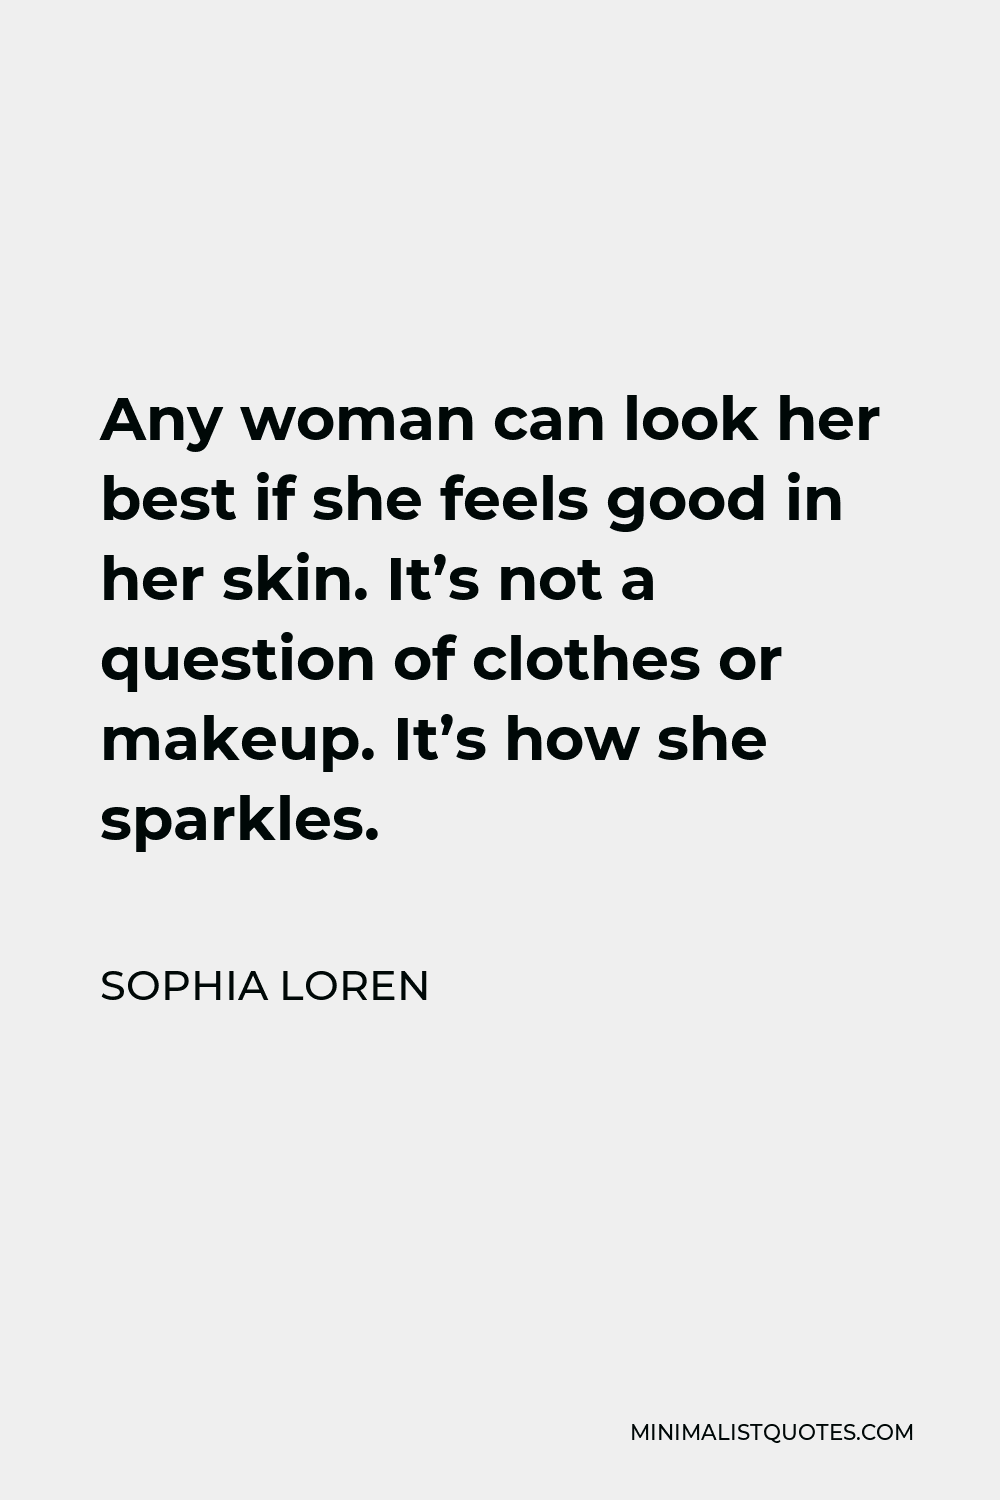 Sophia Loren Quote - Any woman can look her best if she feels good in her skin. It’s not a question of clothes or makeup. It’s how she sparkles.